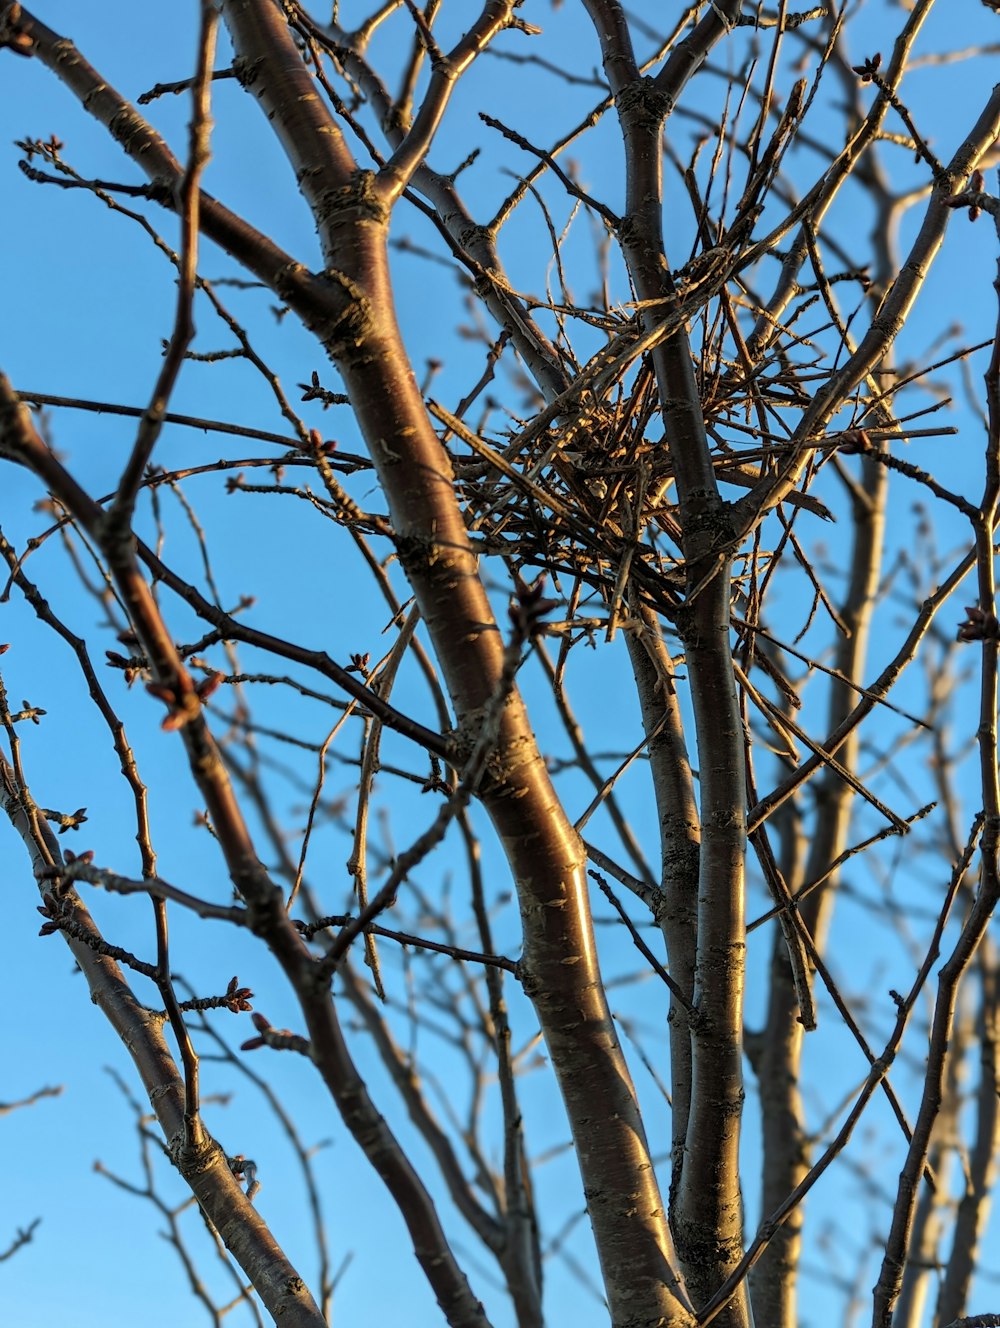 a bird's nest in a bare tree against a blue sky